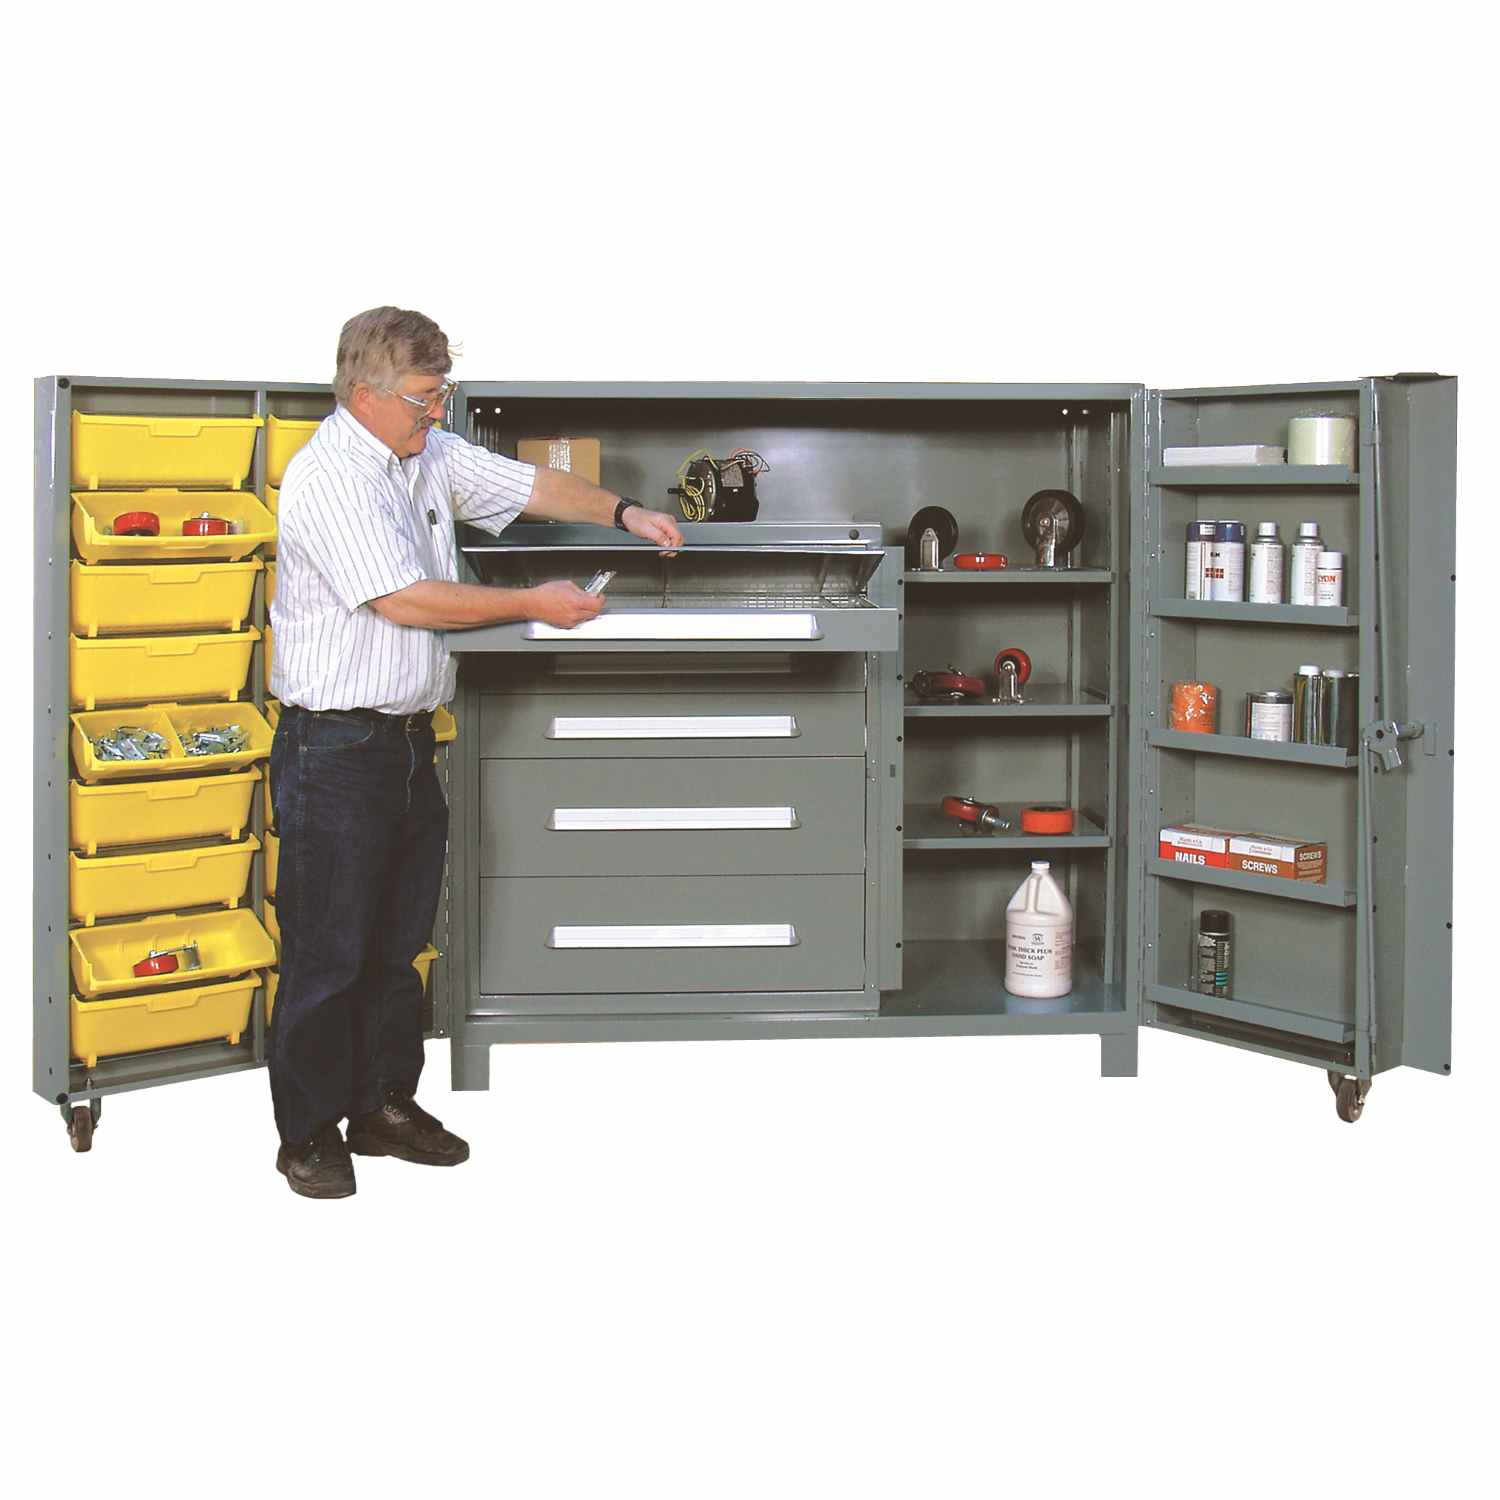 1103f All Welded Maintenance Center With Modular Drawers By Lyon